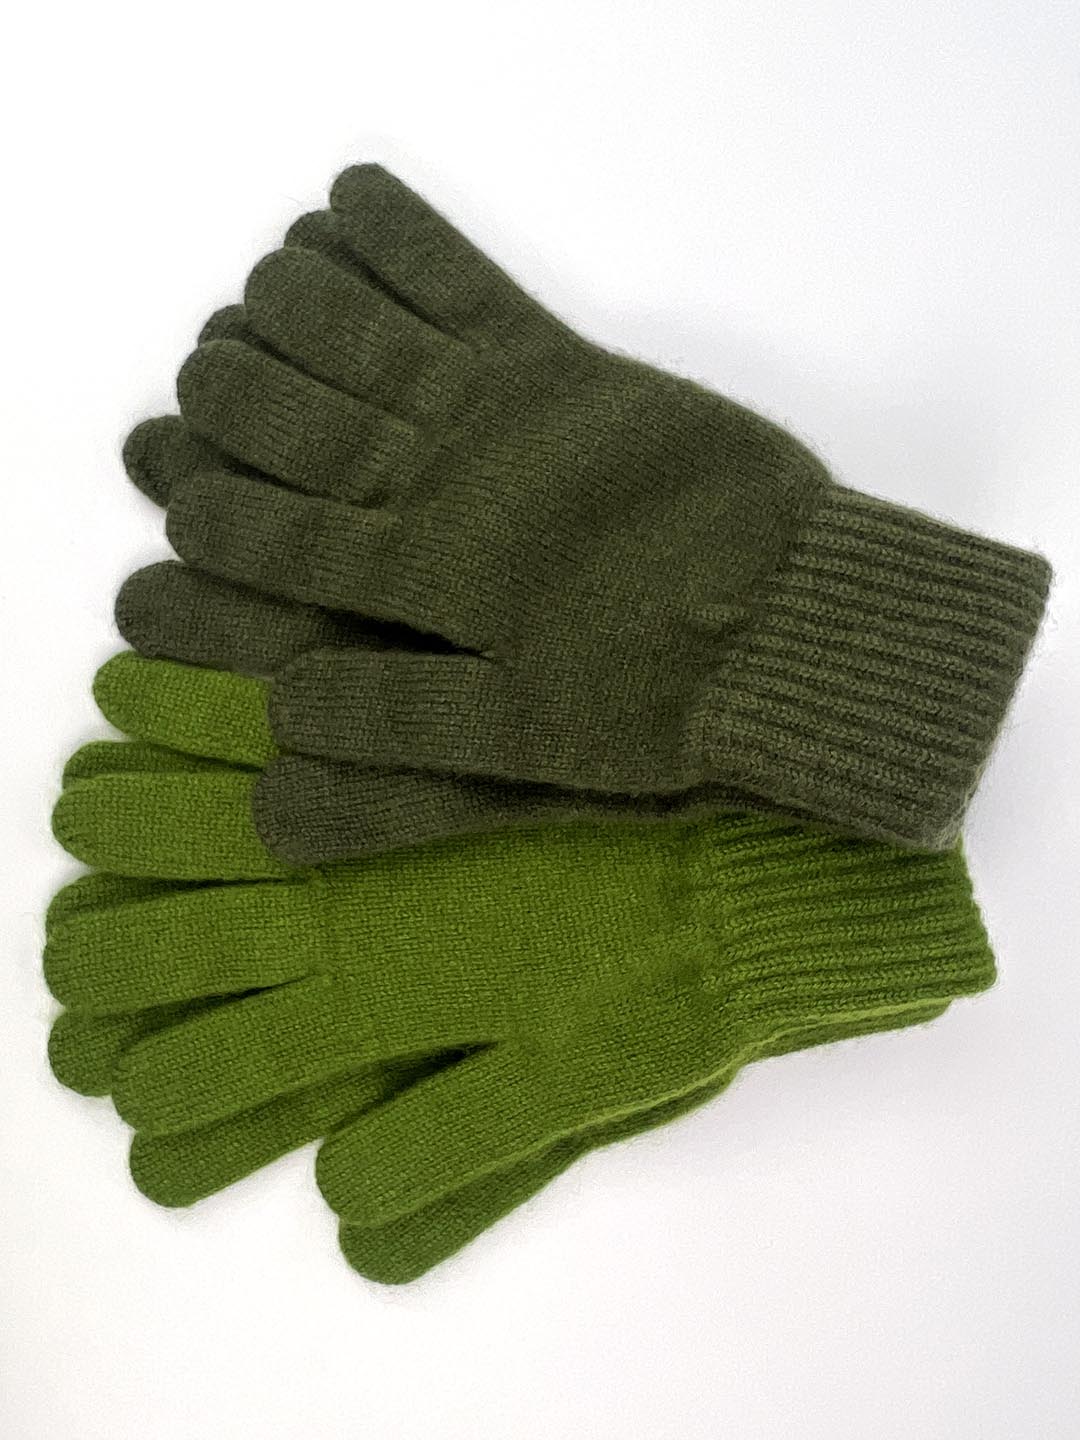 Cashmere gloves in moss green shades. Knitted in the Scottish borders